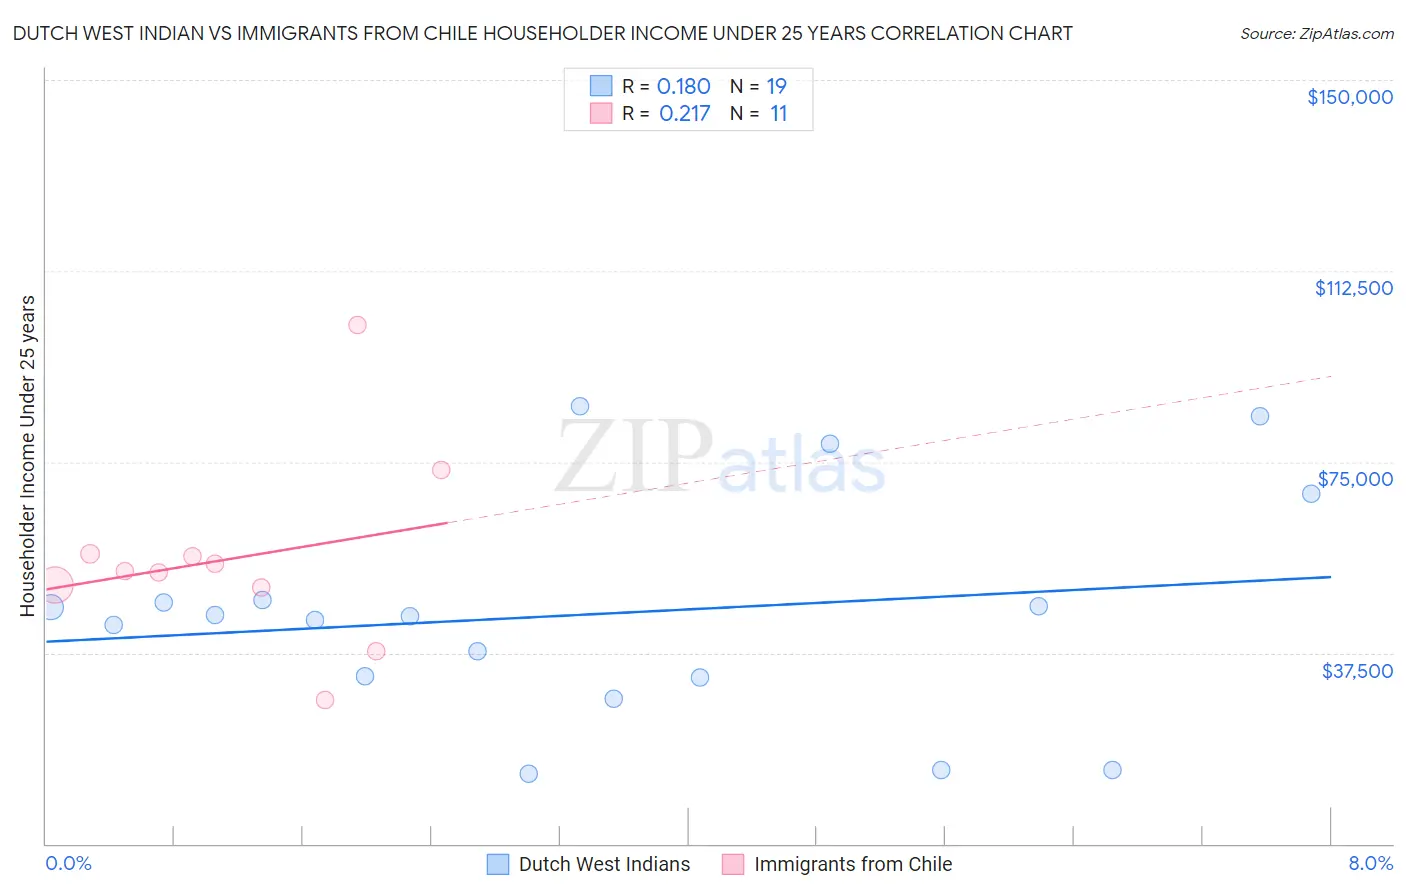 Dutch West Indian vs Immigrants from Chile Householder Income Under 25 years